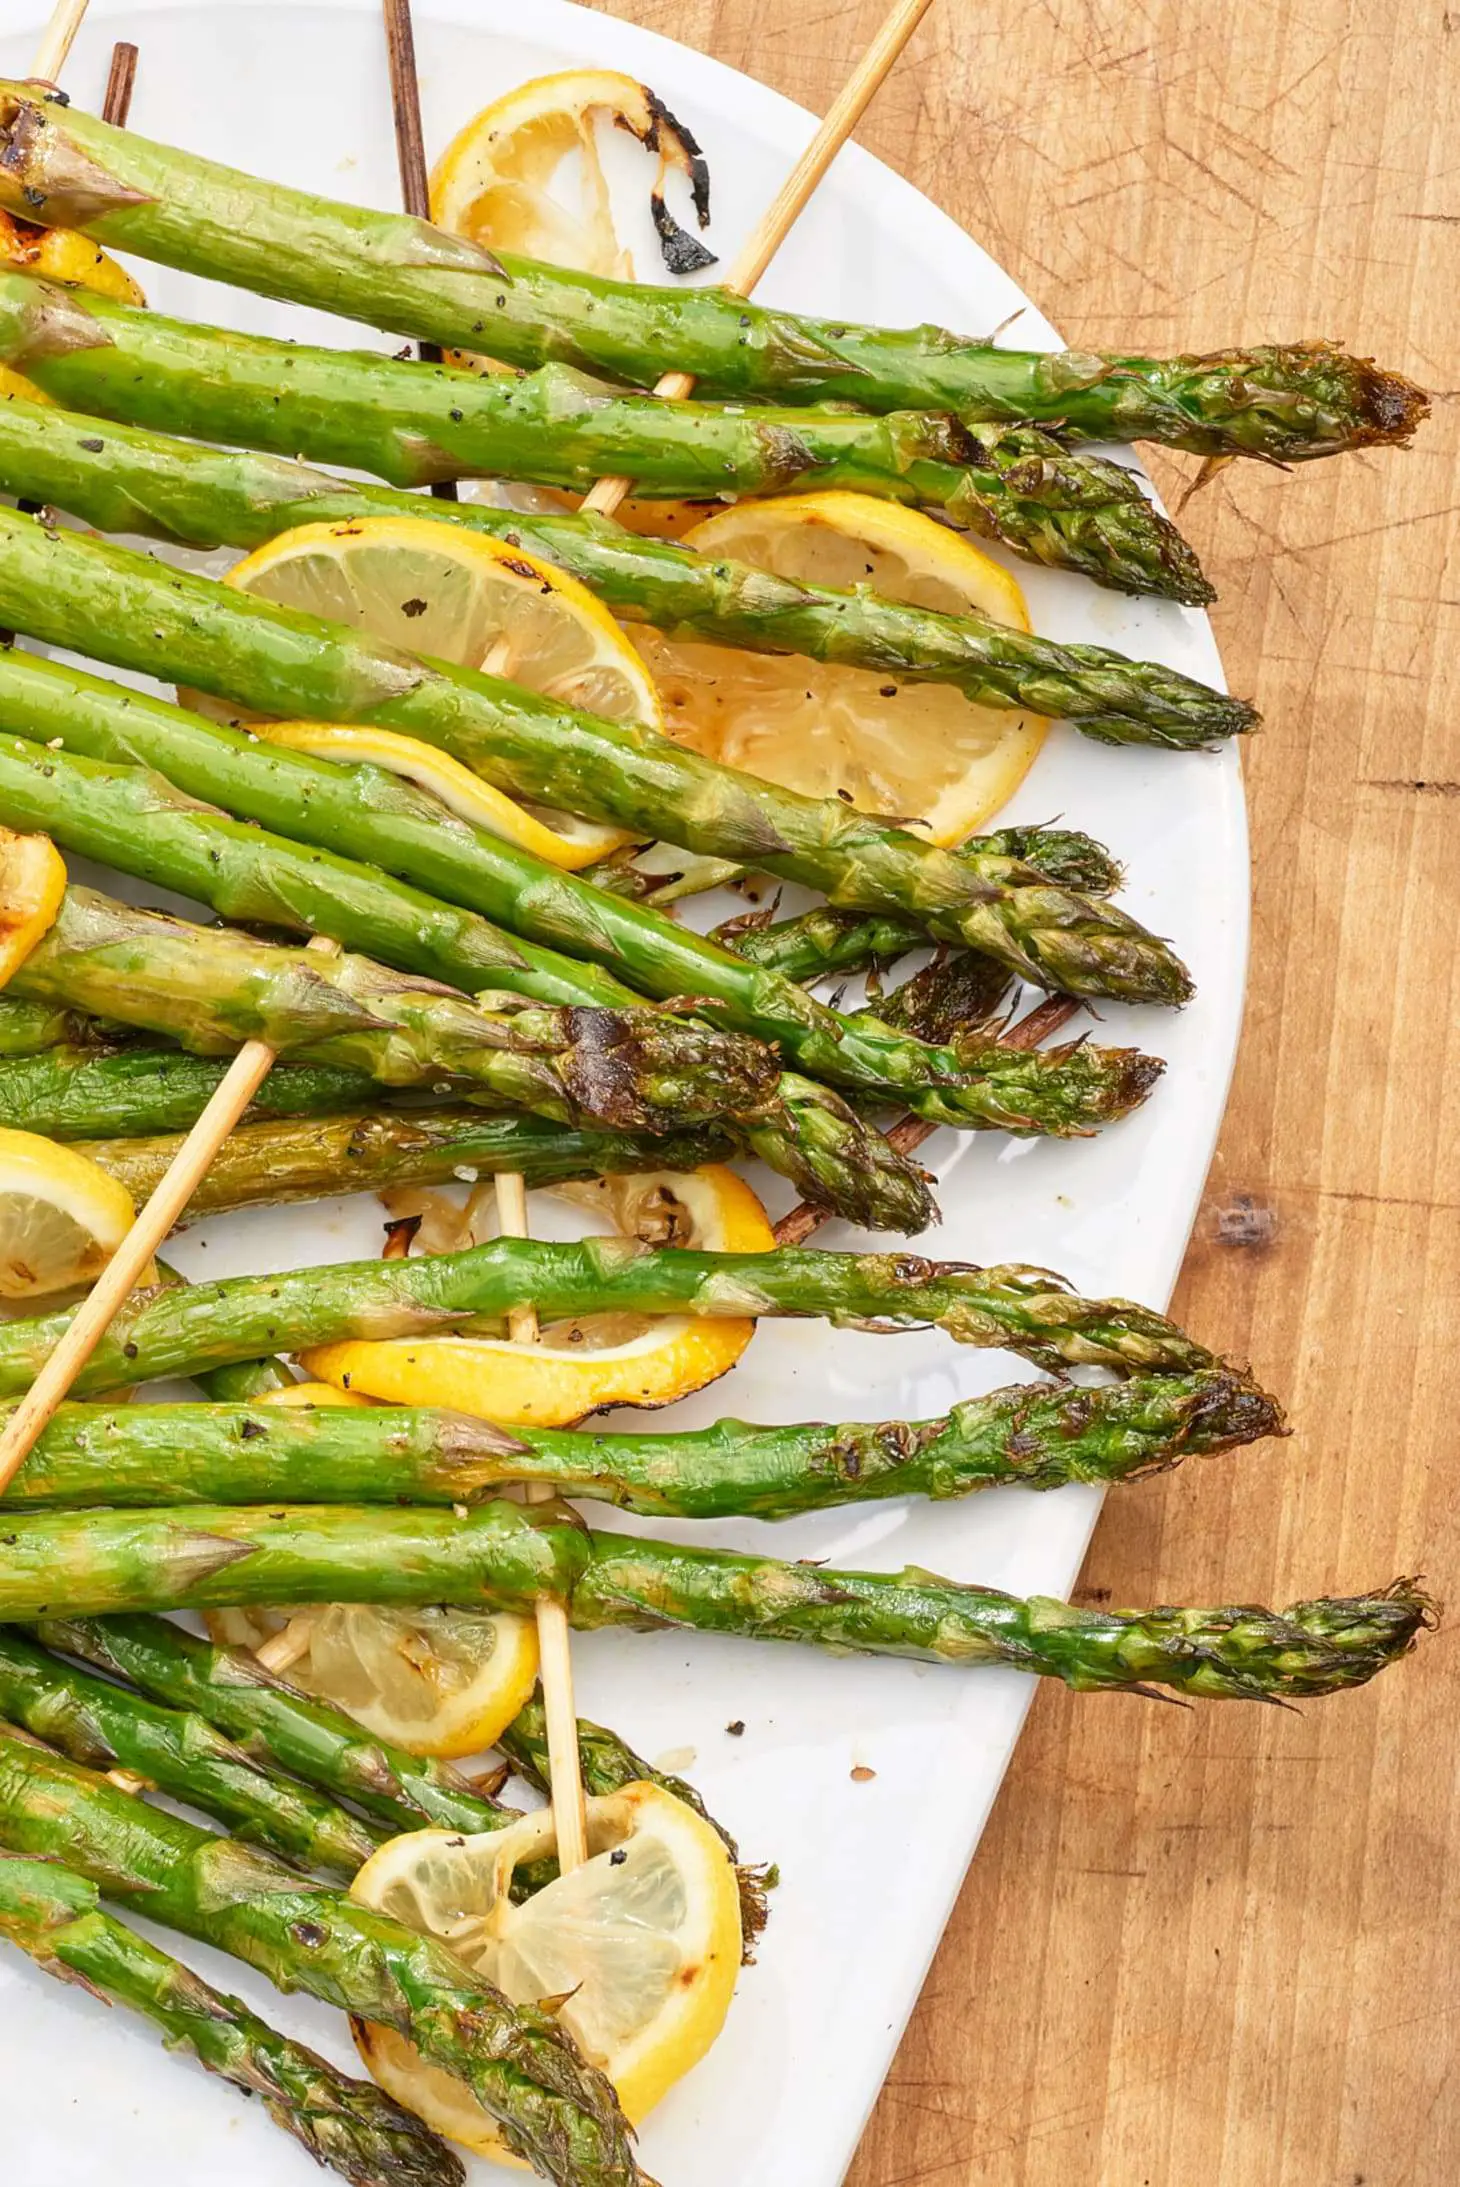 How To Grill Even Better Asparagus